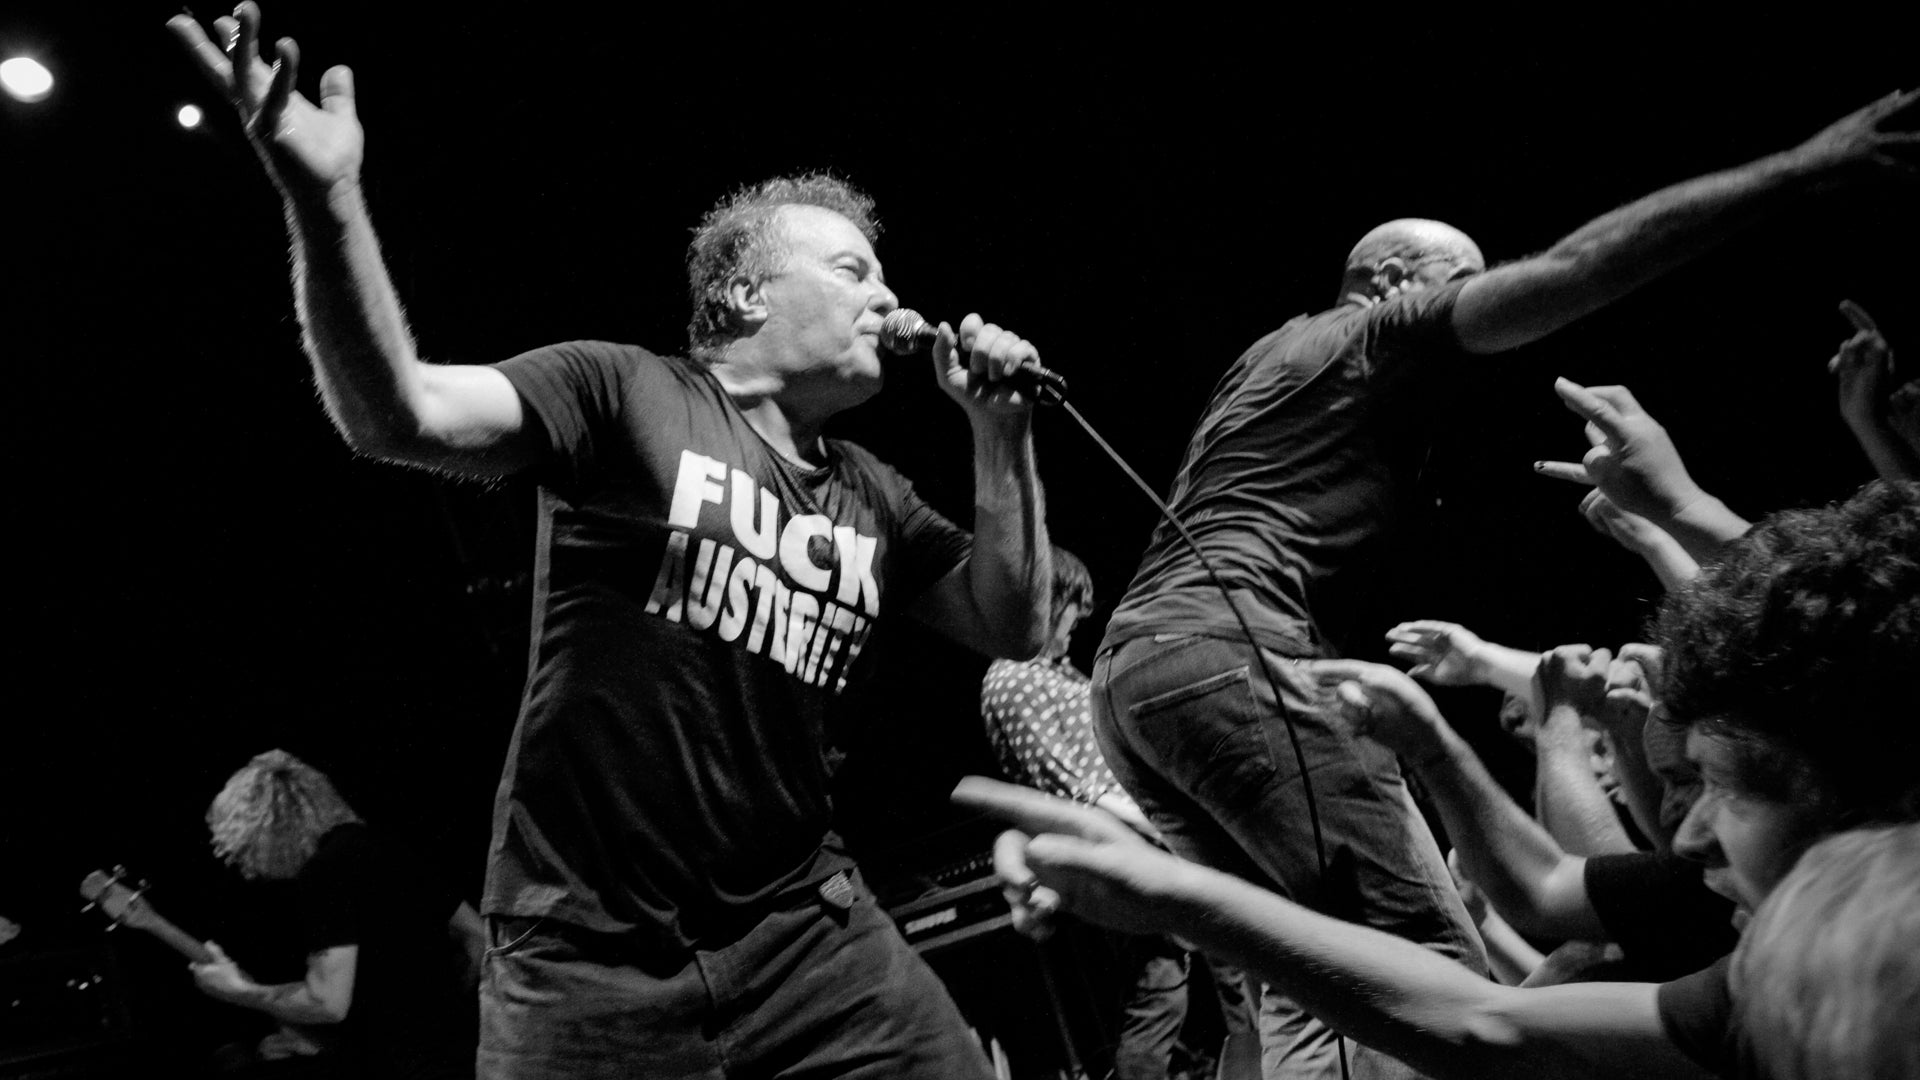 JELLO BIAFRA SPOKEN WORD SERIES ON SALE FOR MARCH